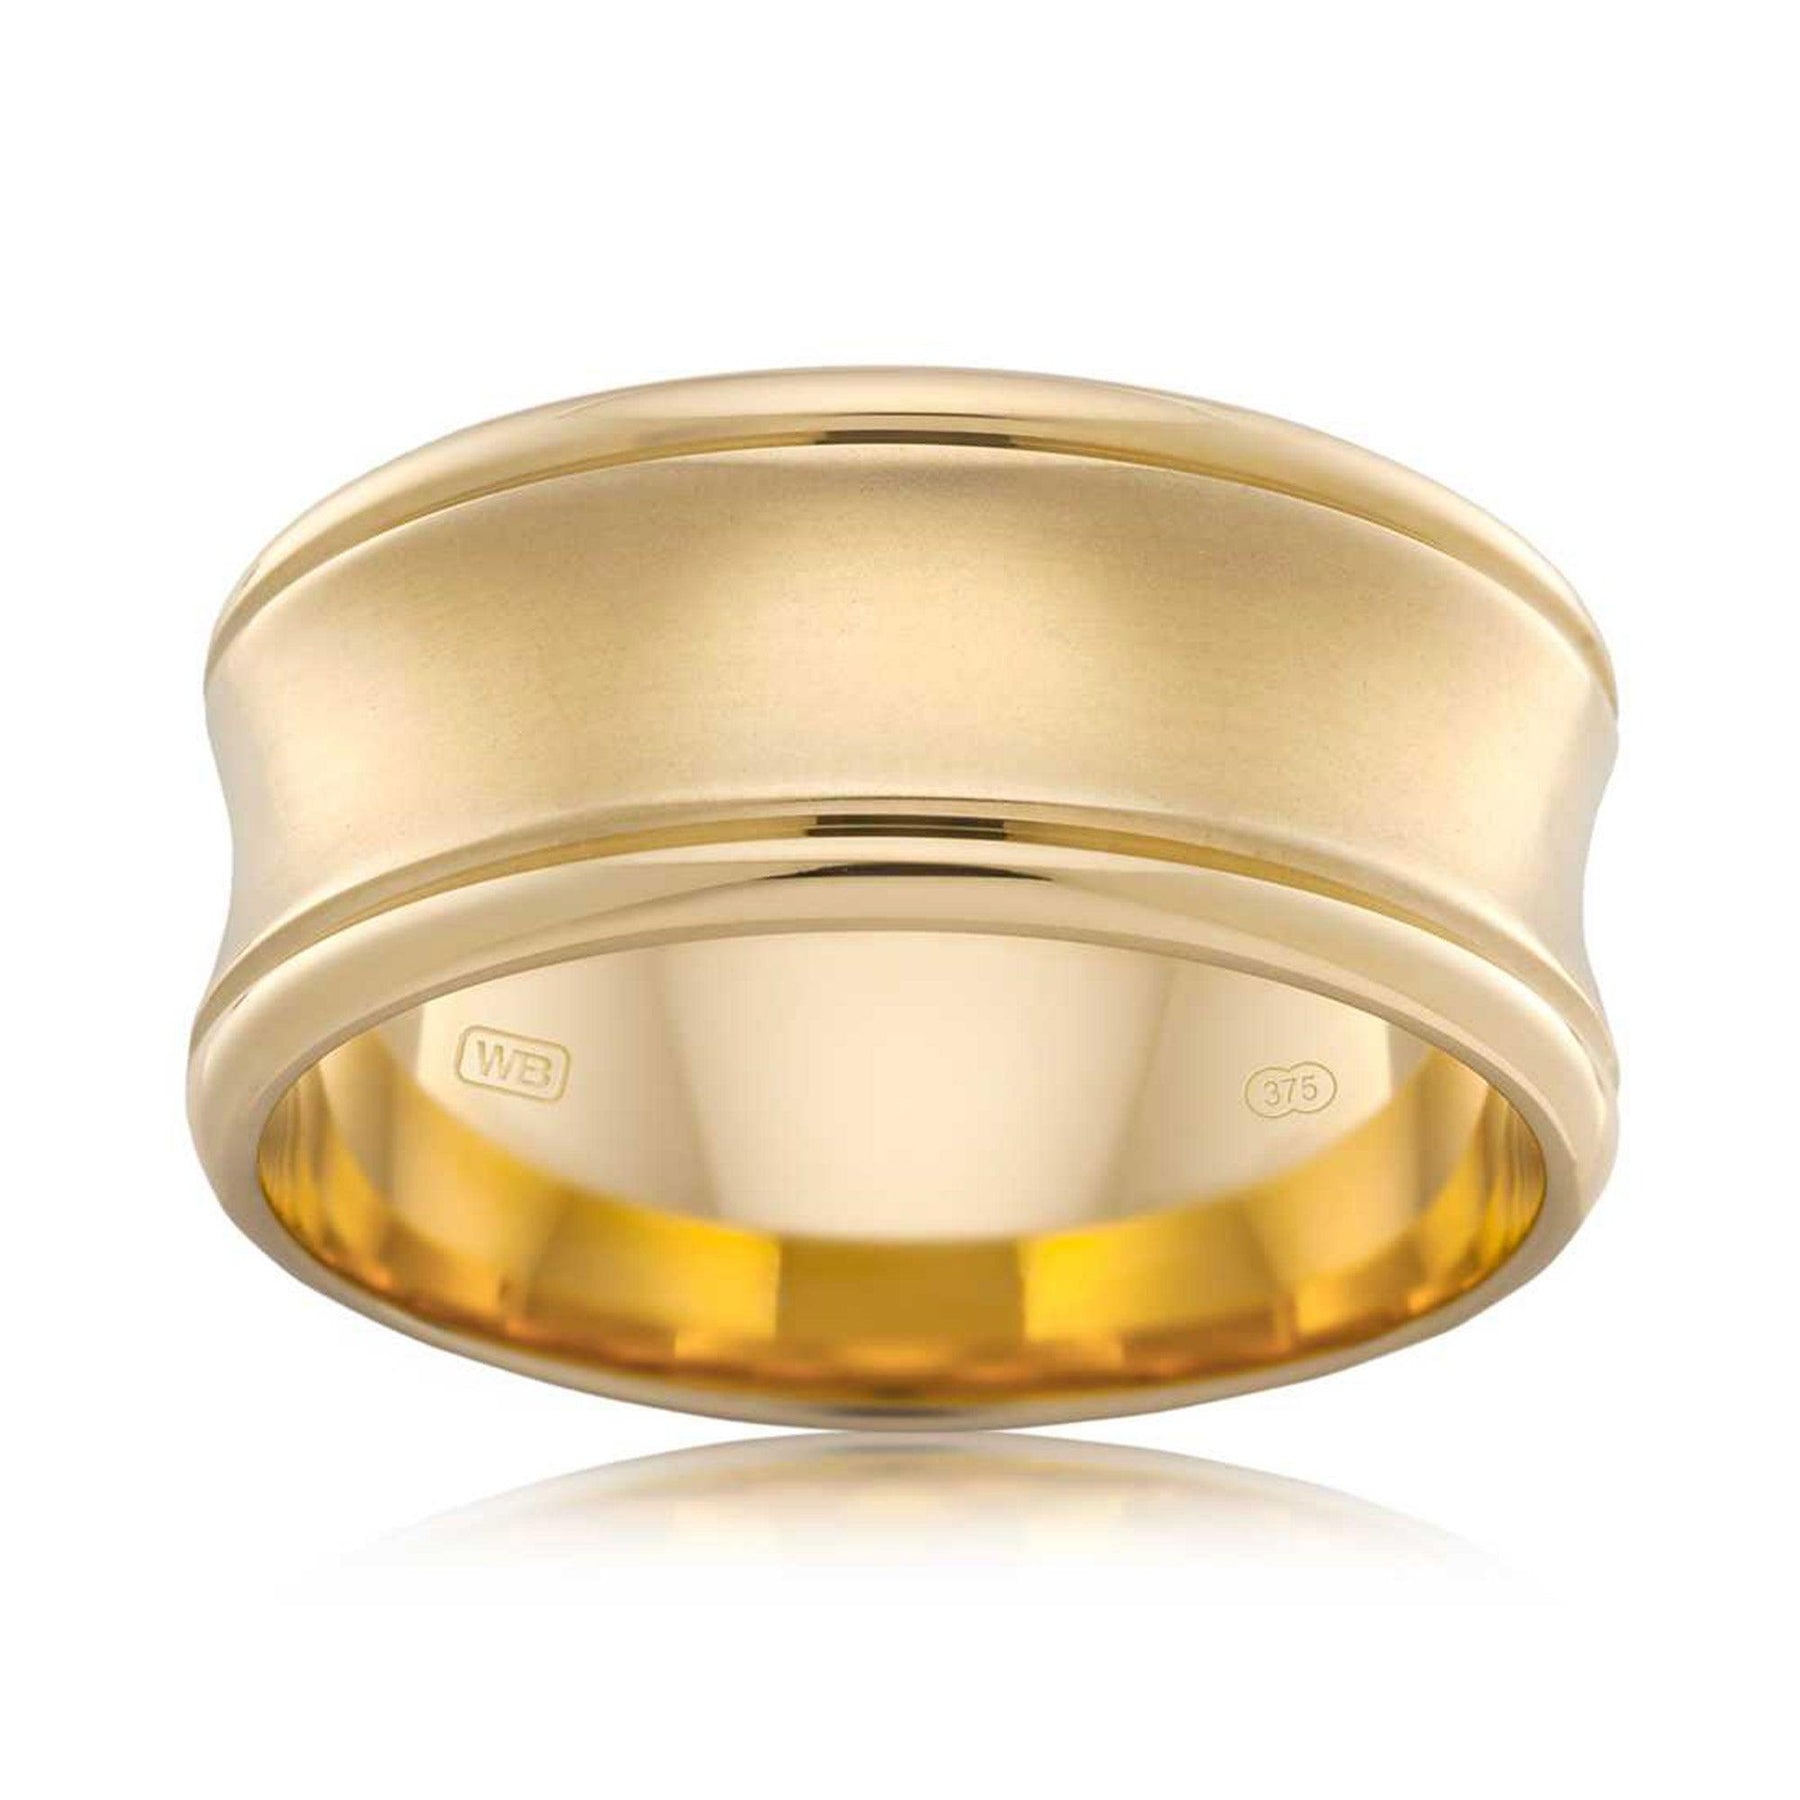 Men's Wedding Band in 9ct Yellow Gold - Wallace Bishop